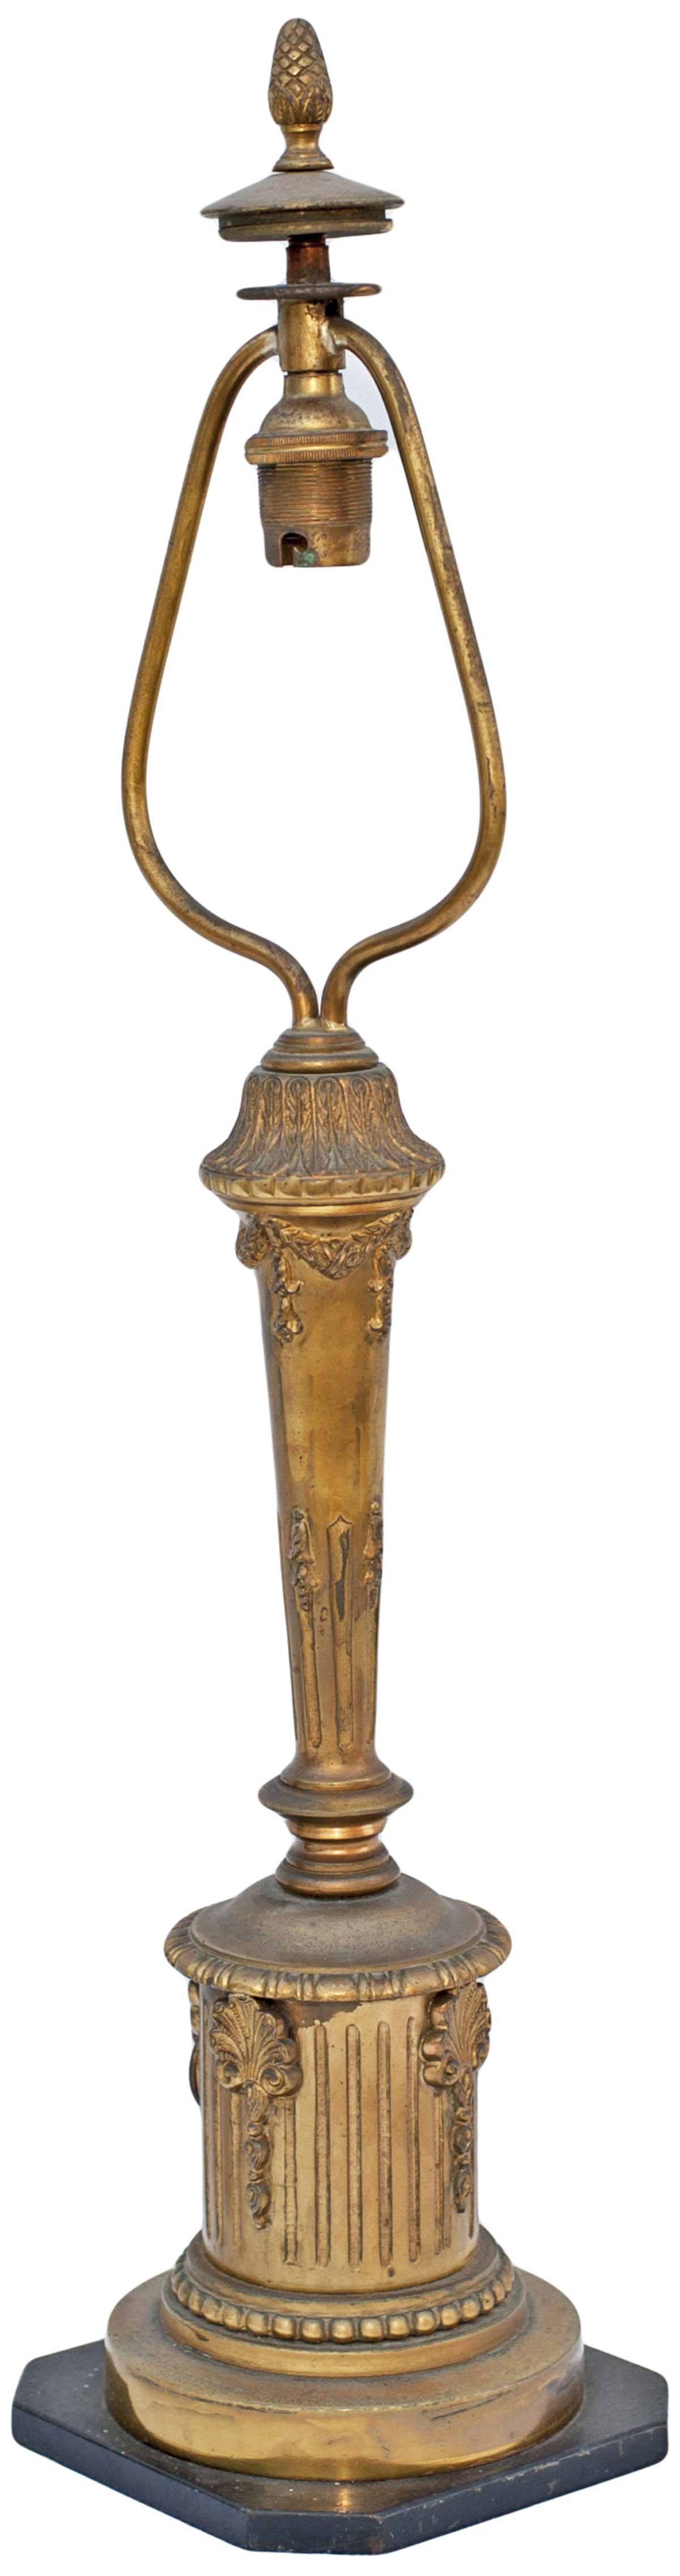 Pullman brass table Lamp type E with festoons, acanthus leaves and tendrils. In good original